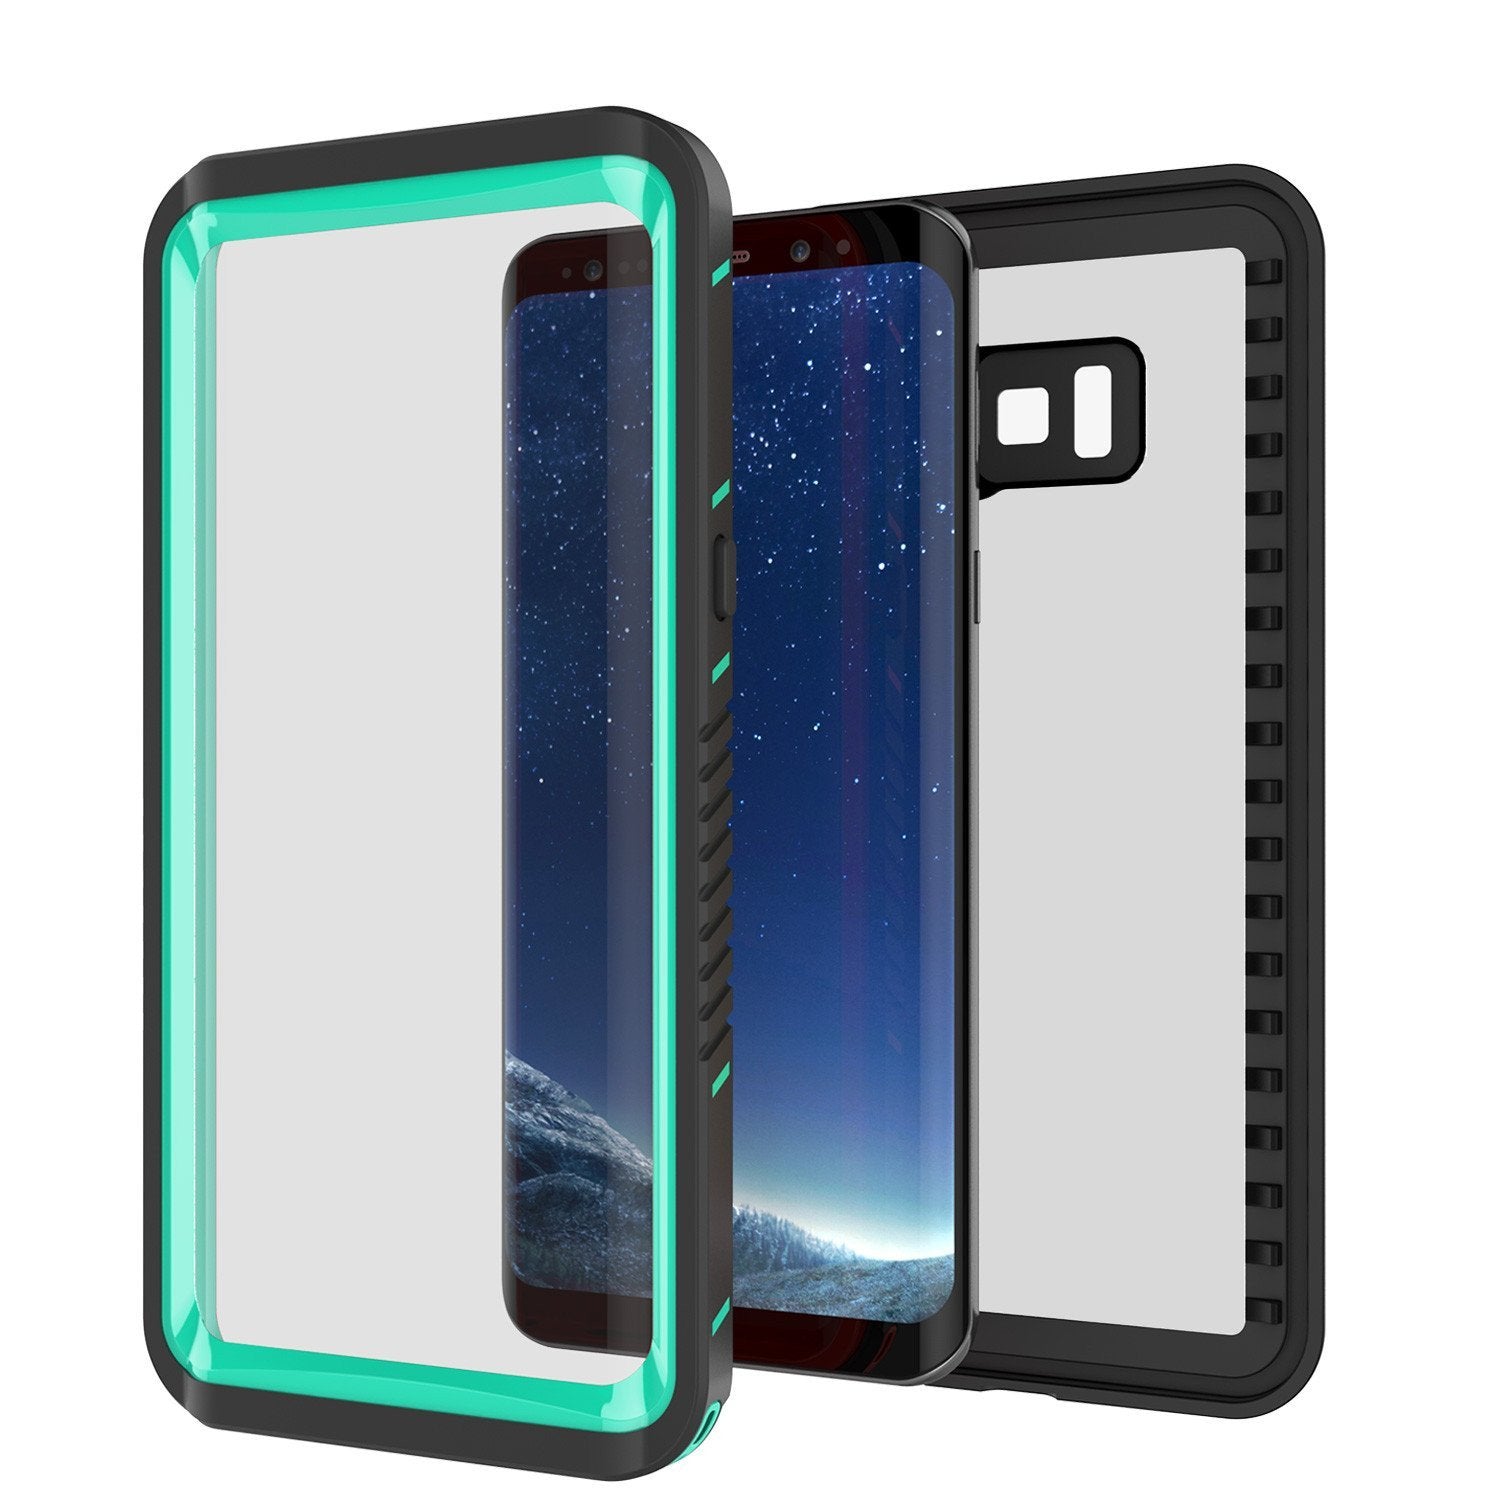 Galaxy S8 PLUS Waterproof Case, Punkcase [Extreme Series] [Slim Fit] [IP68 Certified] [Shockproof] [Snowproof] [Dirproof] Armor Cover W/ Built In Screen Protector for Samsung Galaxy S8+ [Teal] - PunkCase NZ